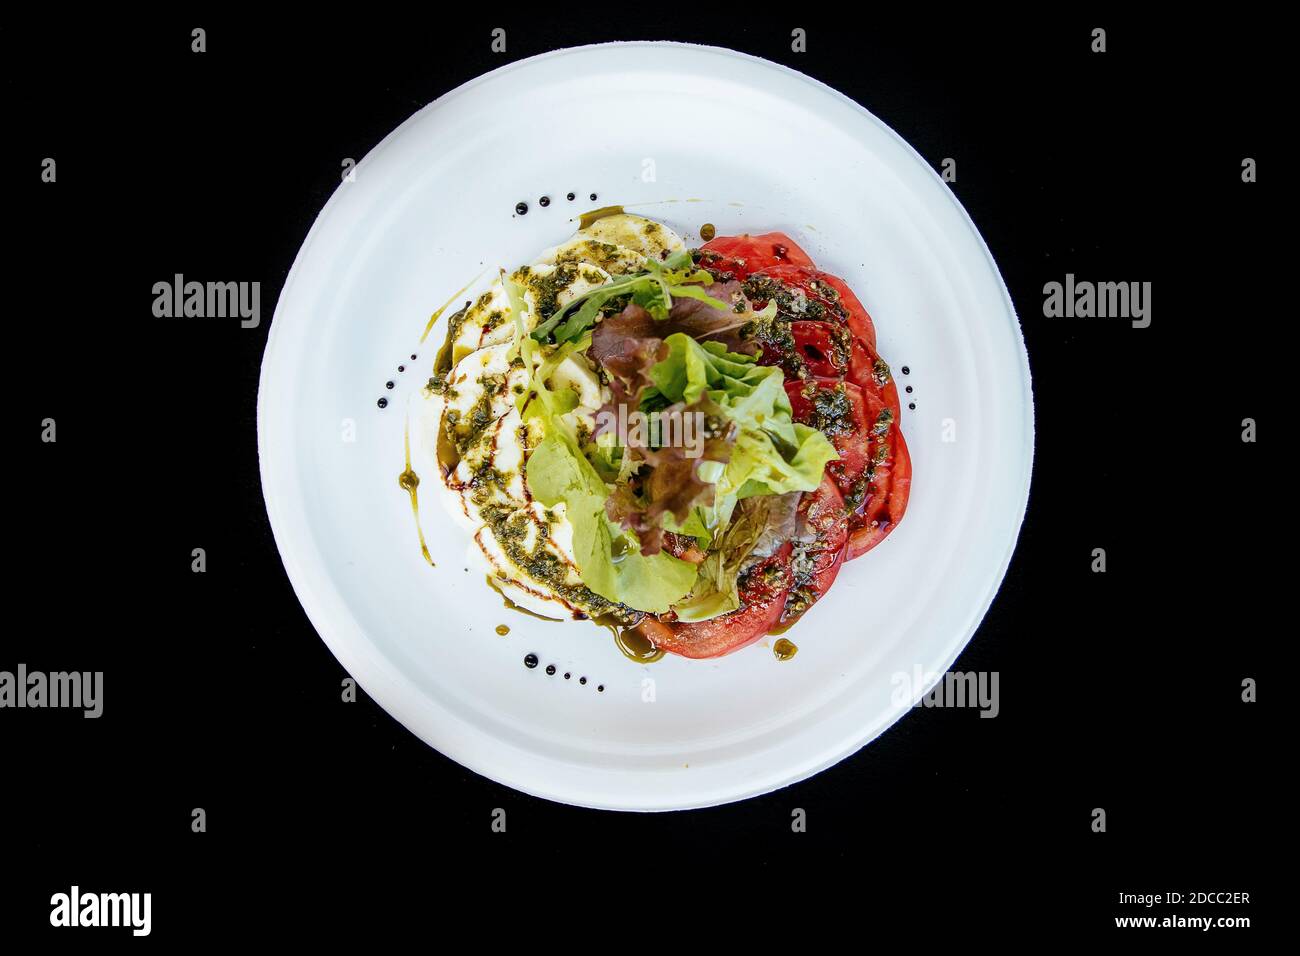 Vegetable salad with tomato cheese, on a white plate, isolate. Stock Photo